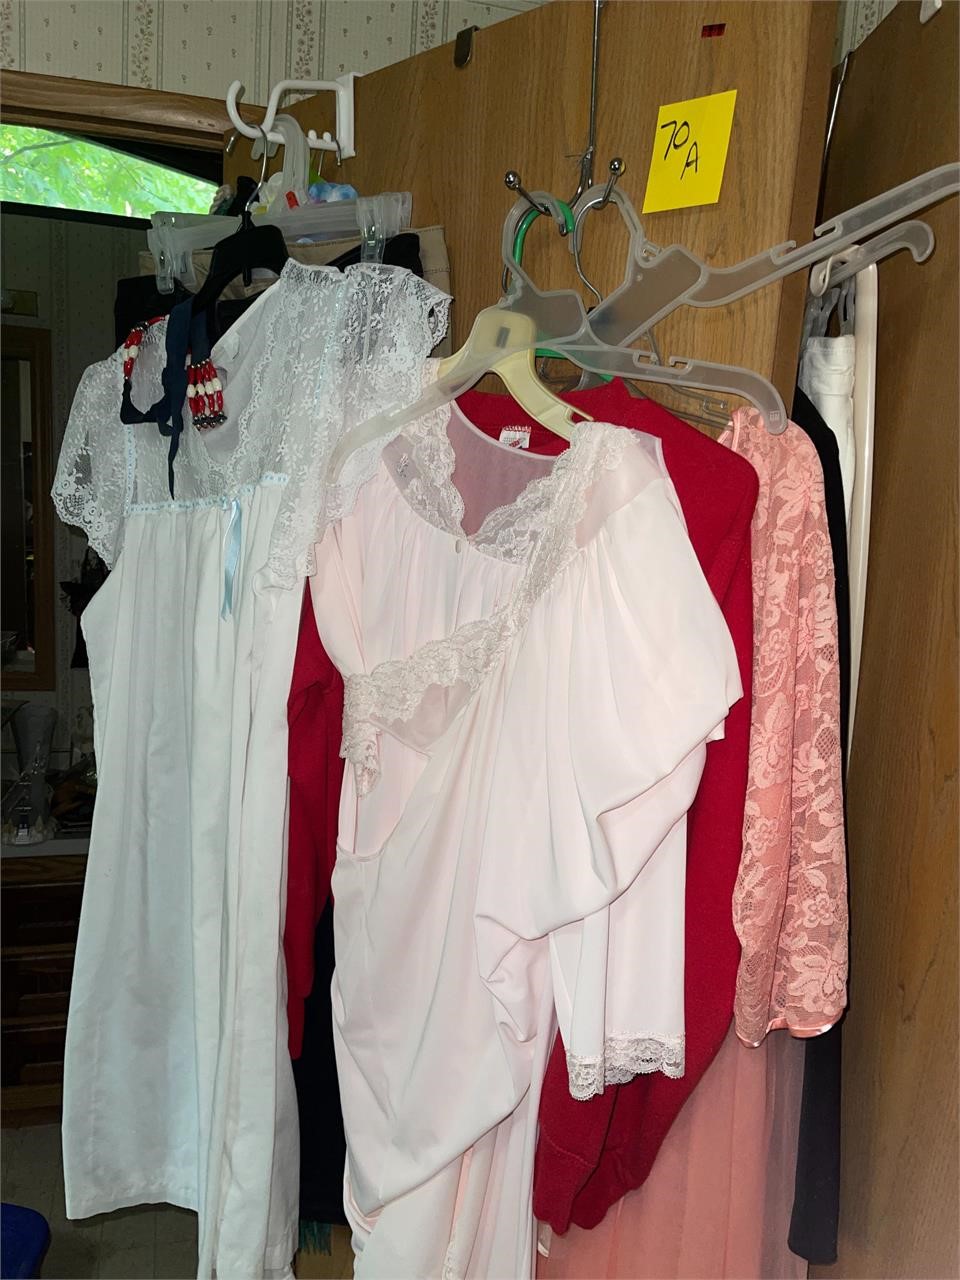 VTG nightgowns clothing hanging on door